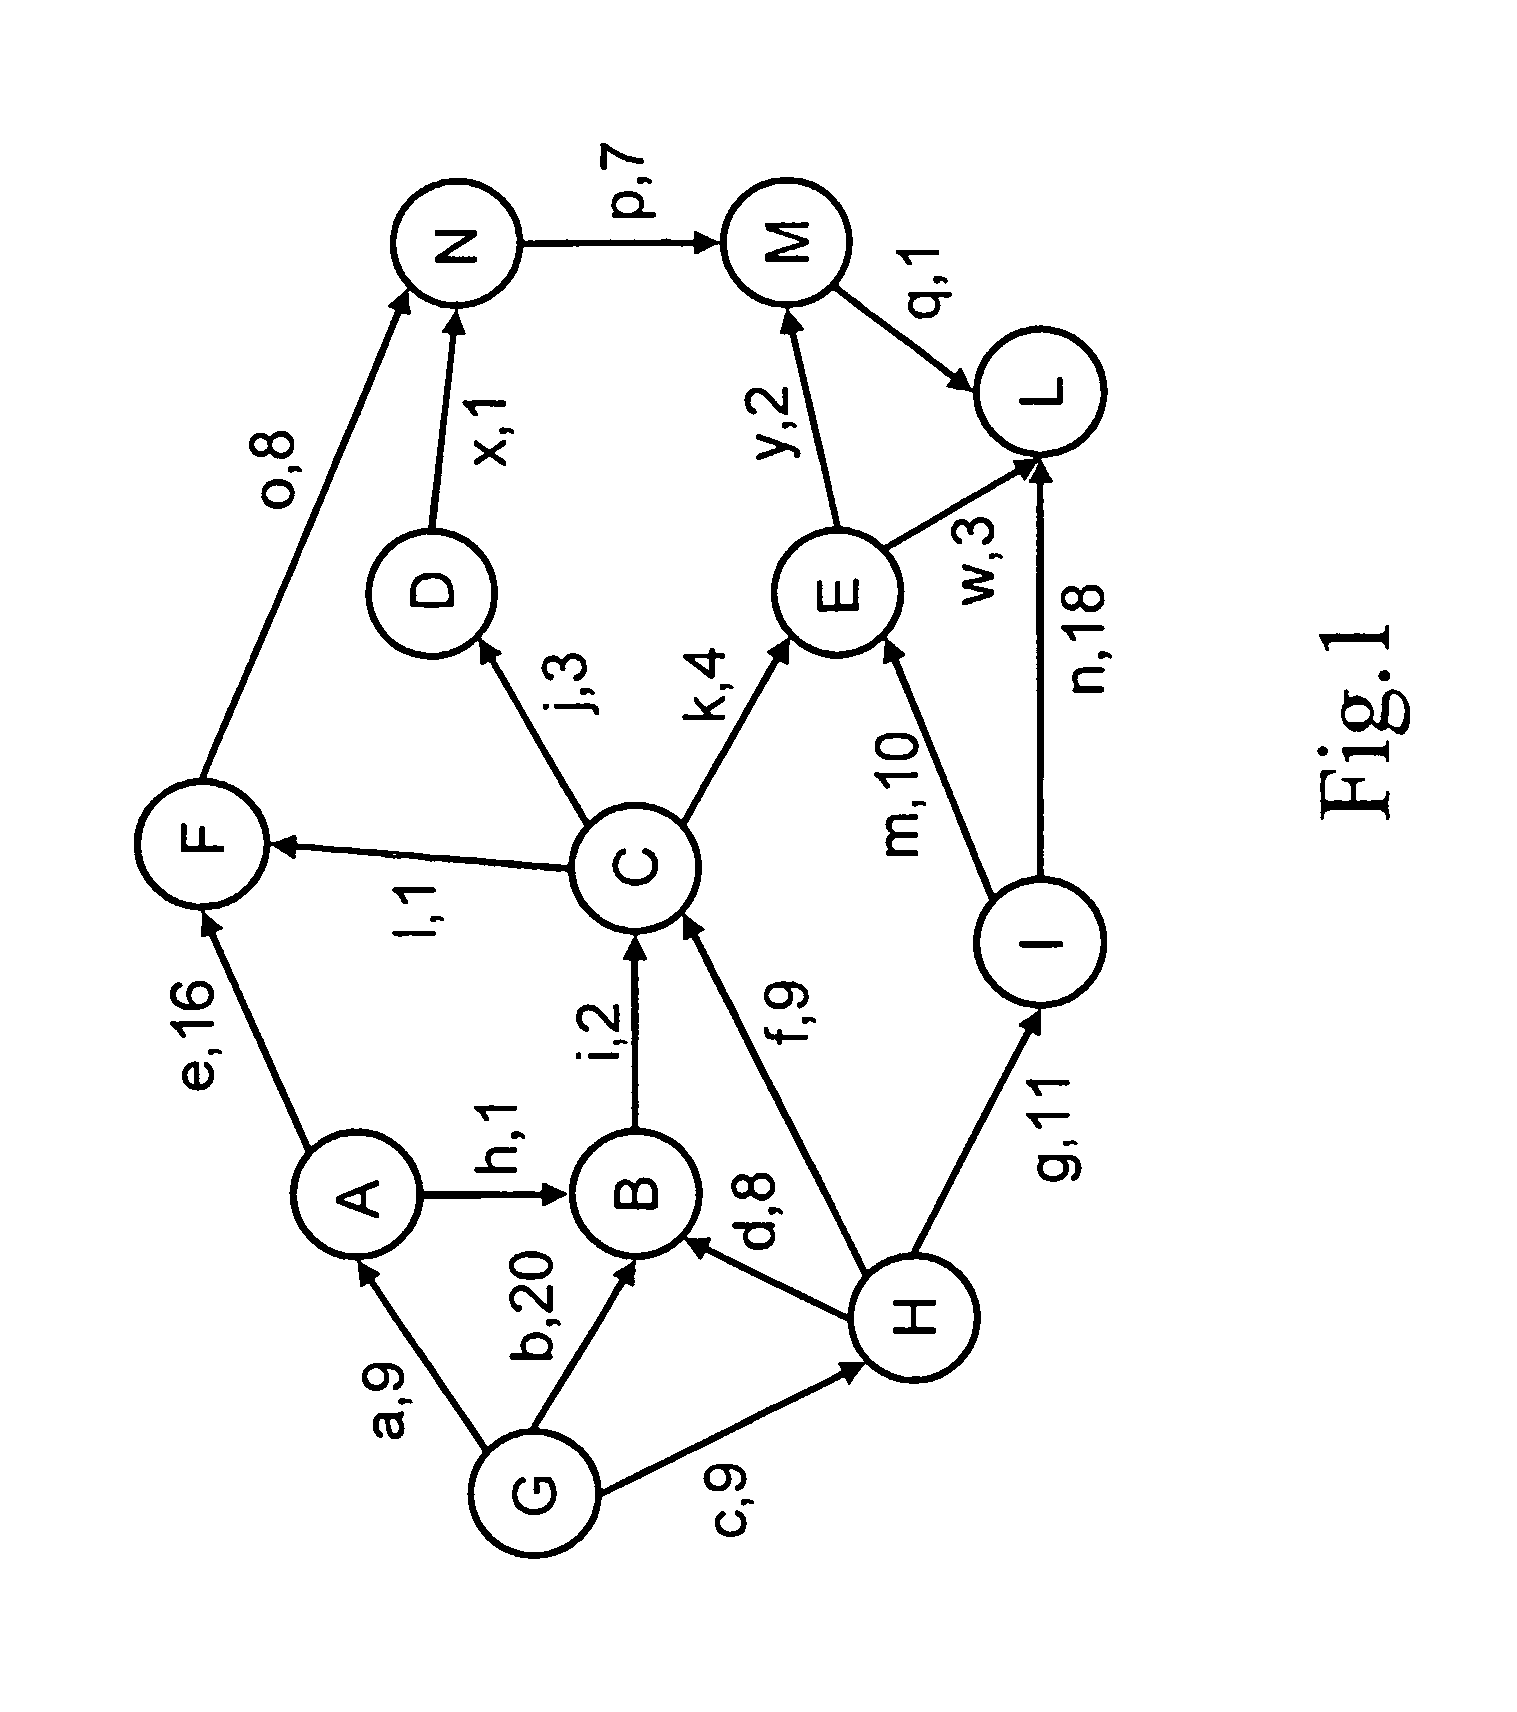 Method for configuring an optical network